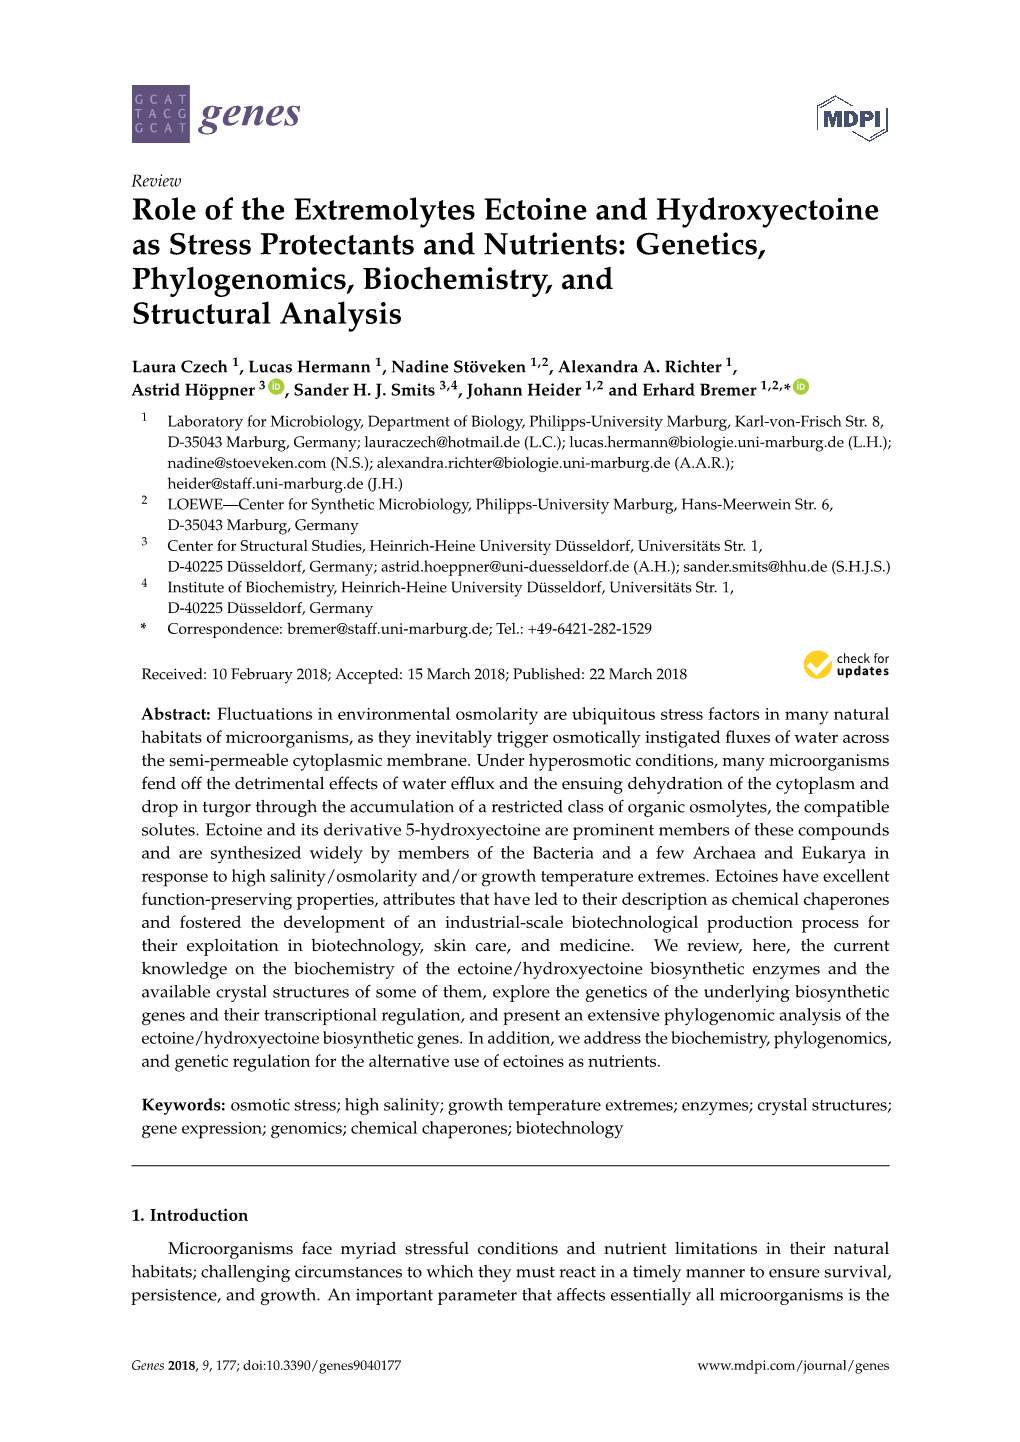 Role of the Extremolytes Ectoine and Hydroxyectoine As Stress Protectants and Nutrients: Genetics, Phylogenomics, Biochemistry, and Structural Analysis